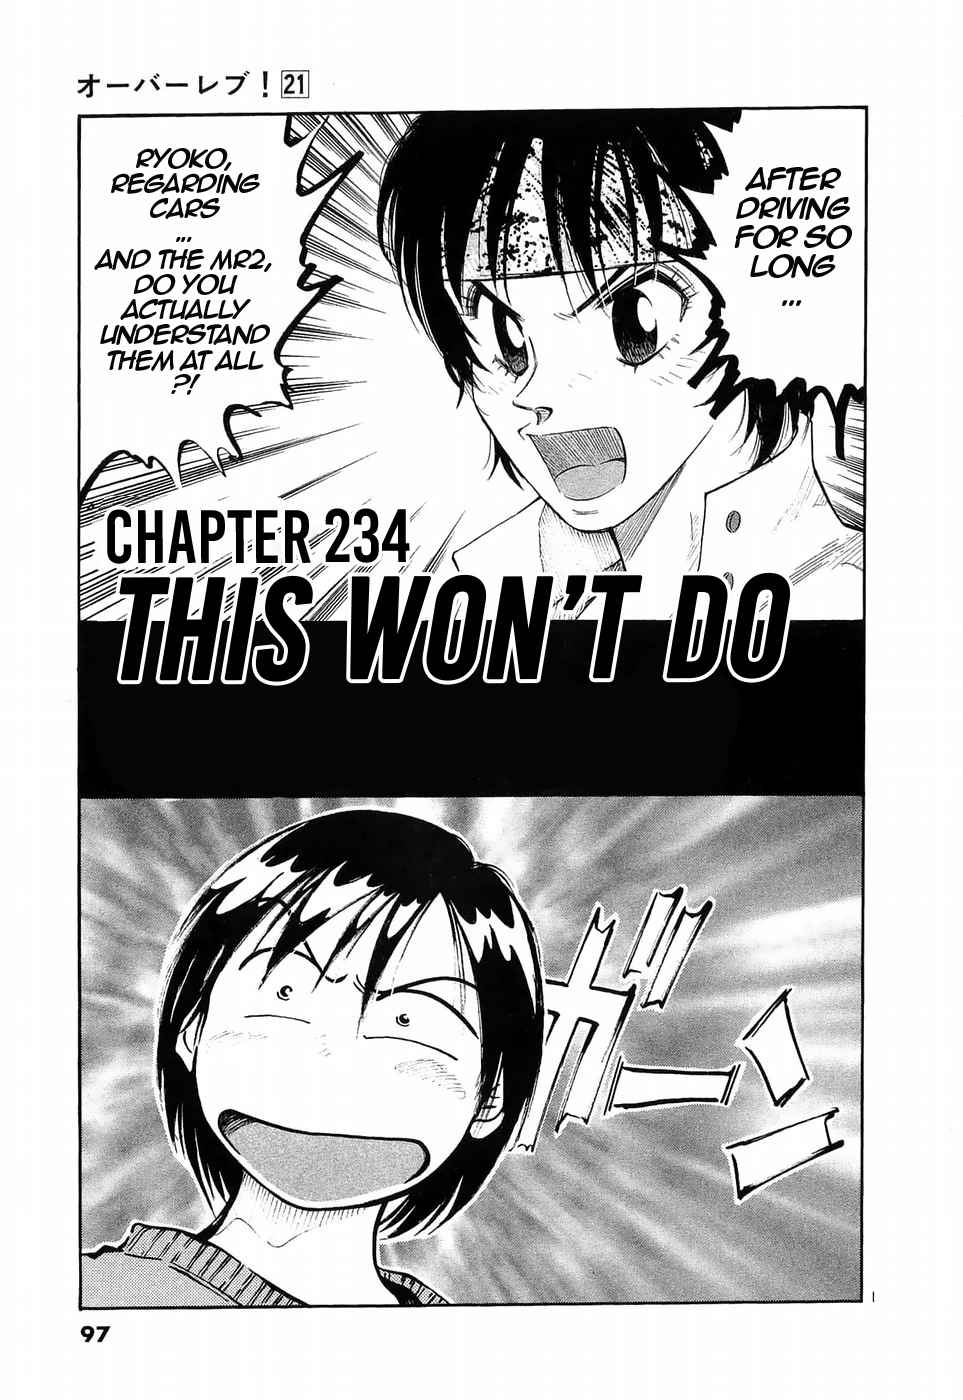 Over Rev! Vol. 21 Ch. 234 This Won't Do